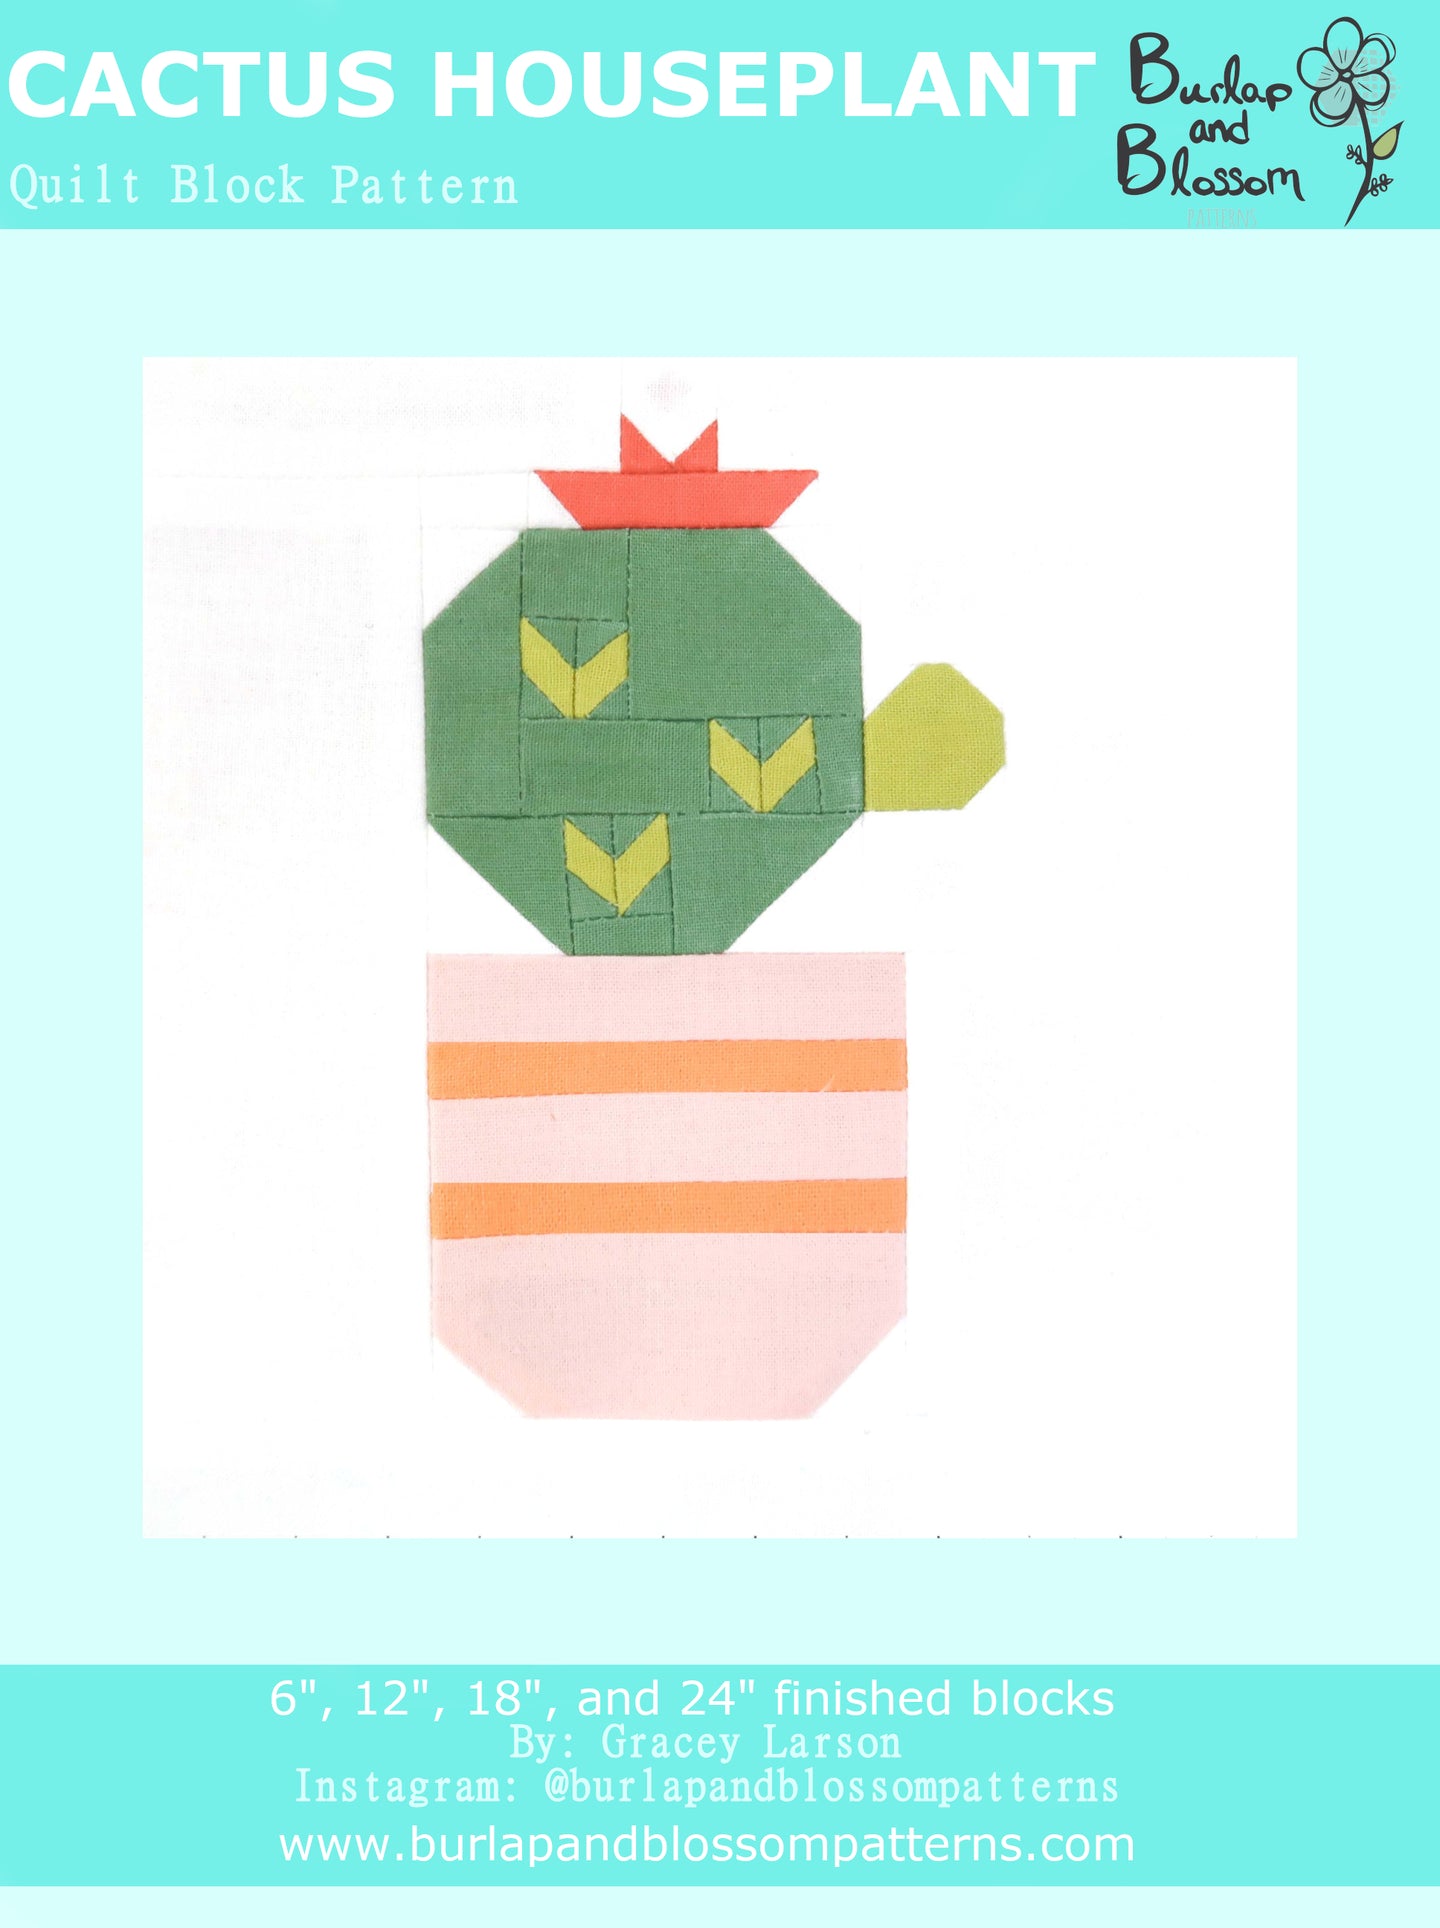 Pattern, Cactus Houseplant Quilt Block by Burlap and Blossom (digital download)